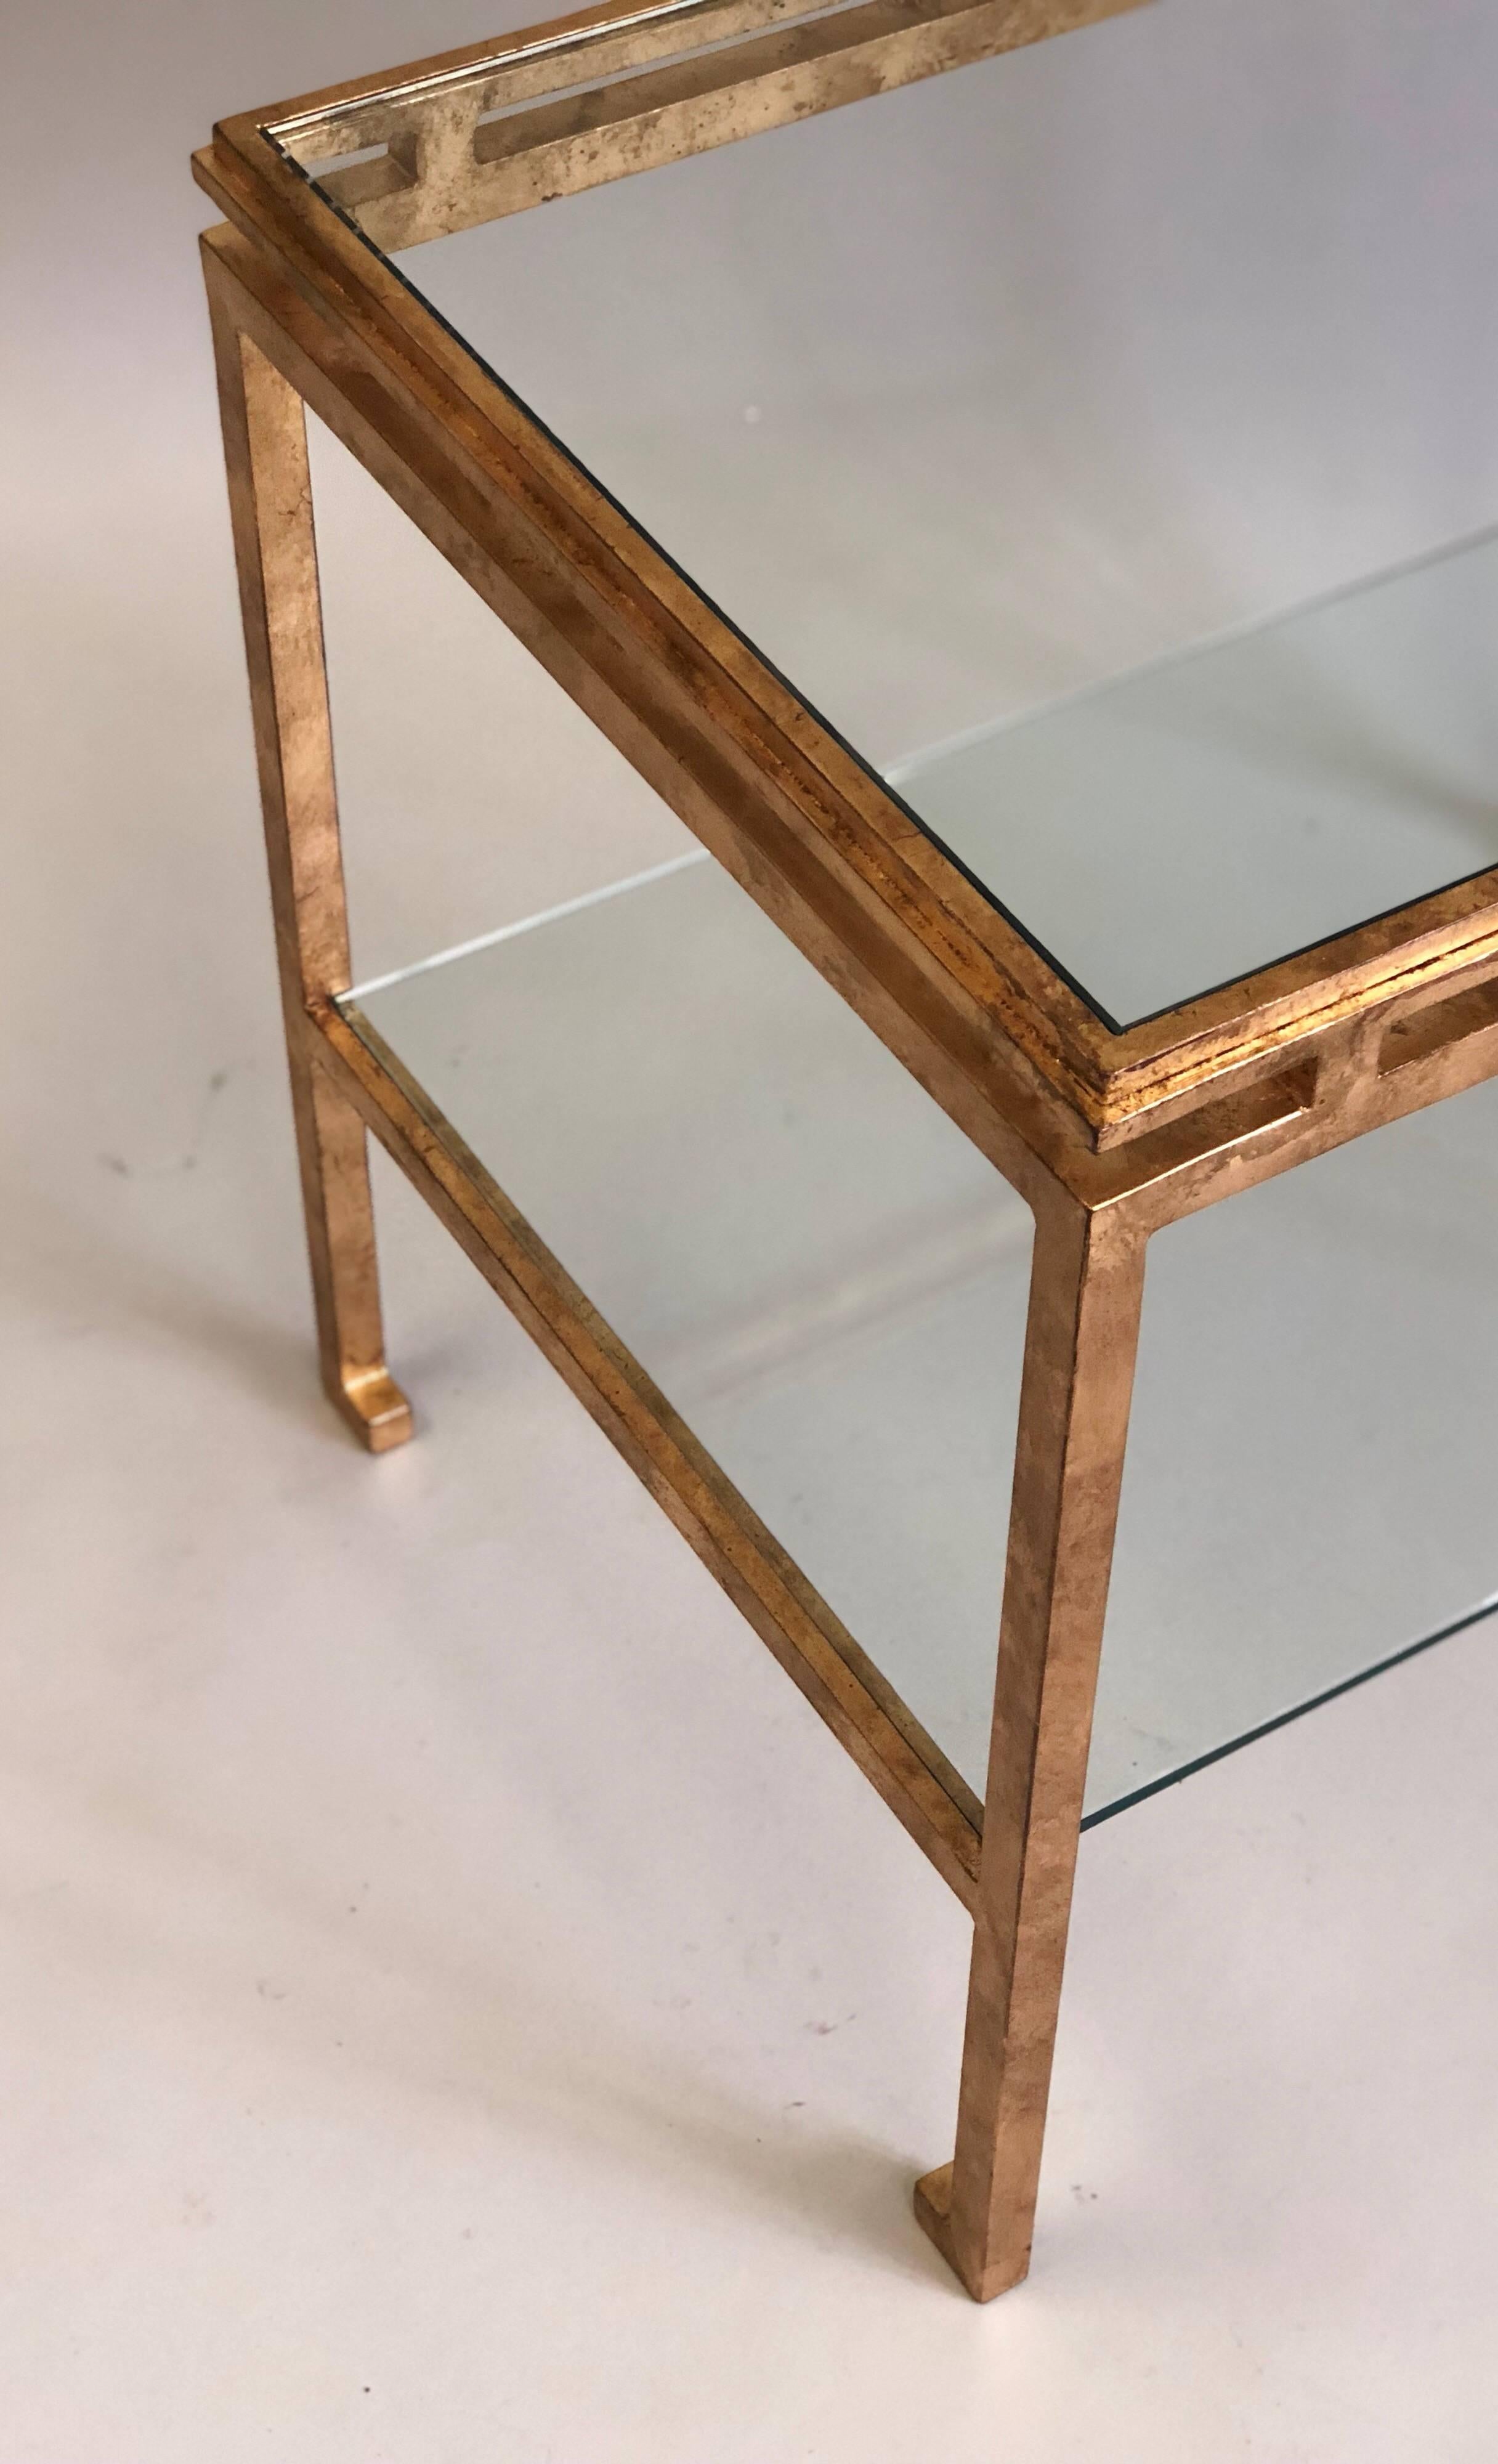 Pair of French Mid-Century Modern Gilt Iron Side / End Tables by Maison Ramsay For Sale 1